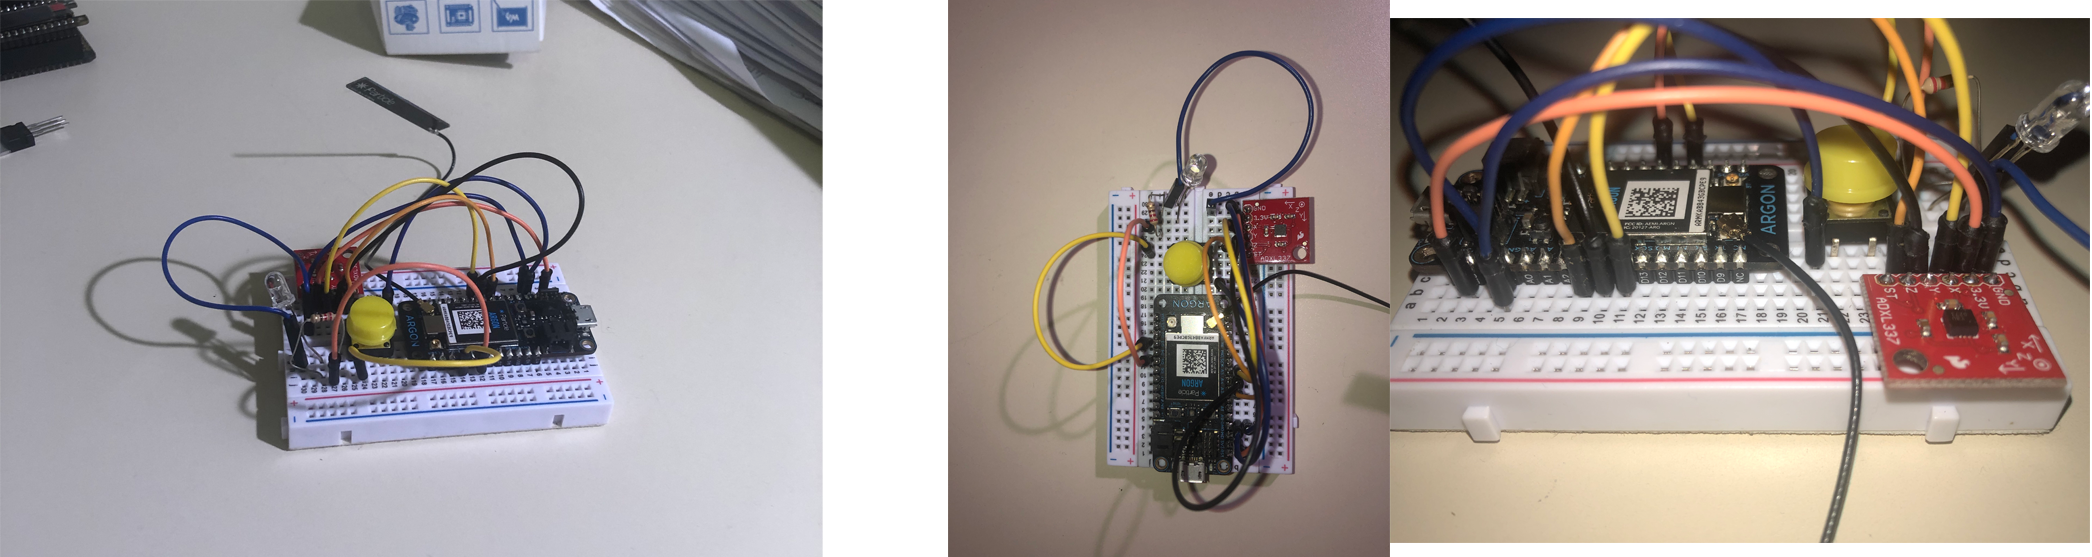 Three photos of the same circuit. On the left is a photo from a distance that is hard to see some of the components. In the middle, is a top down view. On the right, is a close up side on view showing wiring between a microcontroller and a breakout board..